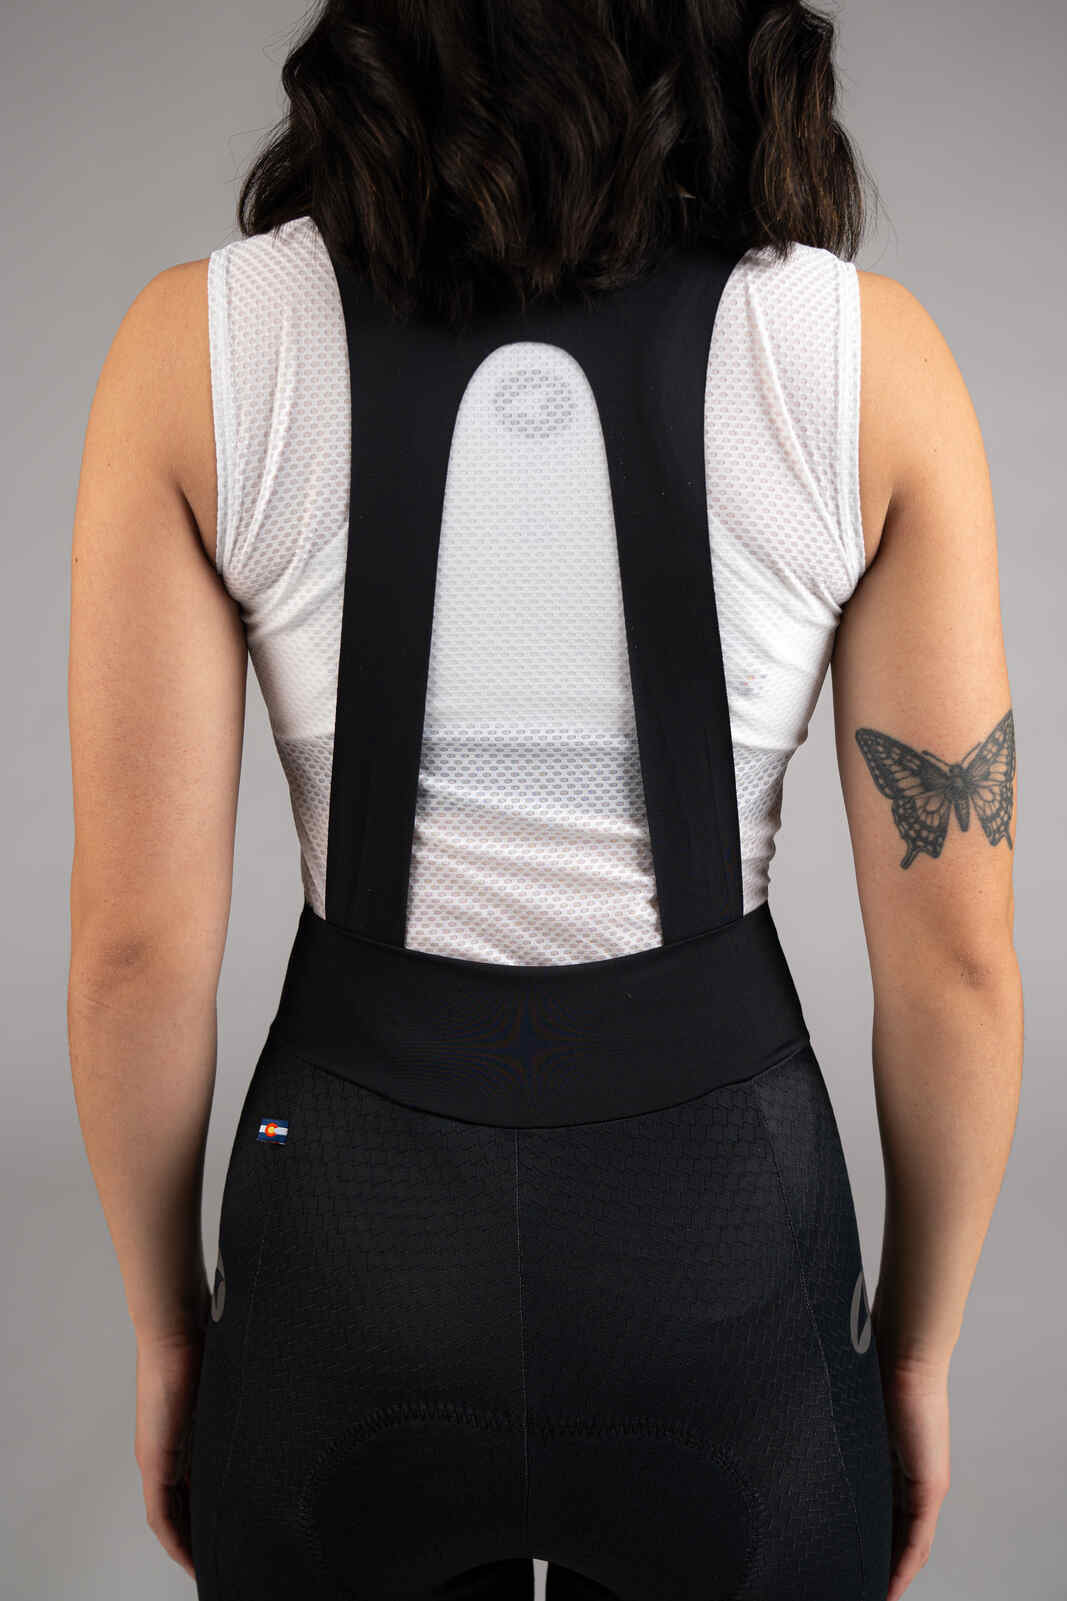 Women's Compression Cycling Bibs - Uppers